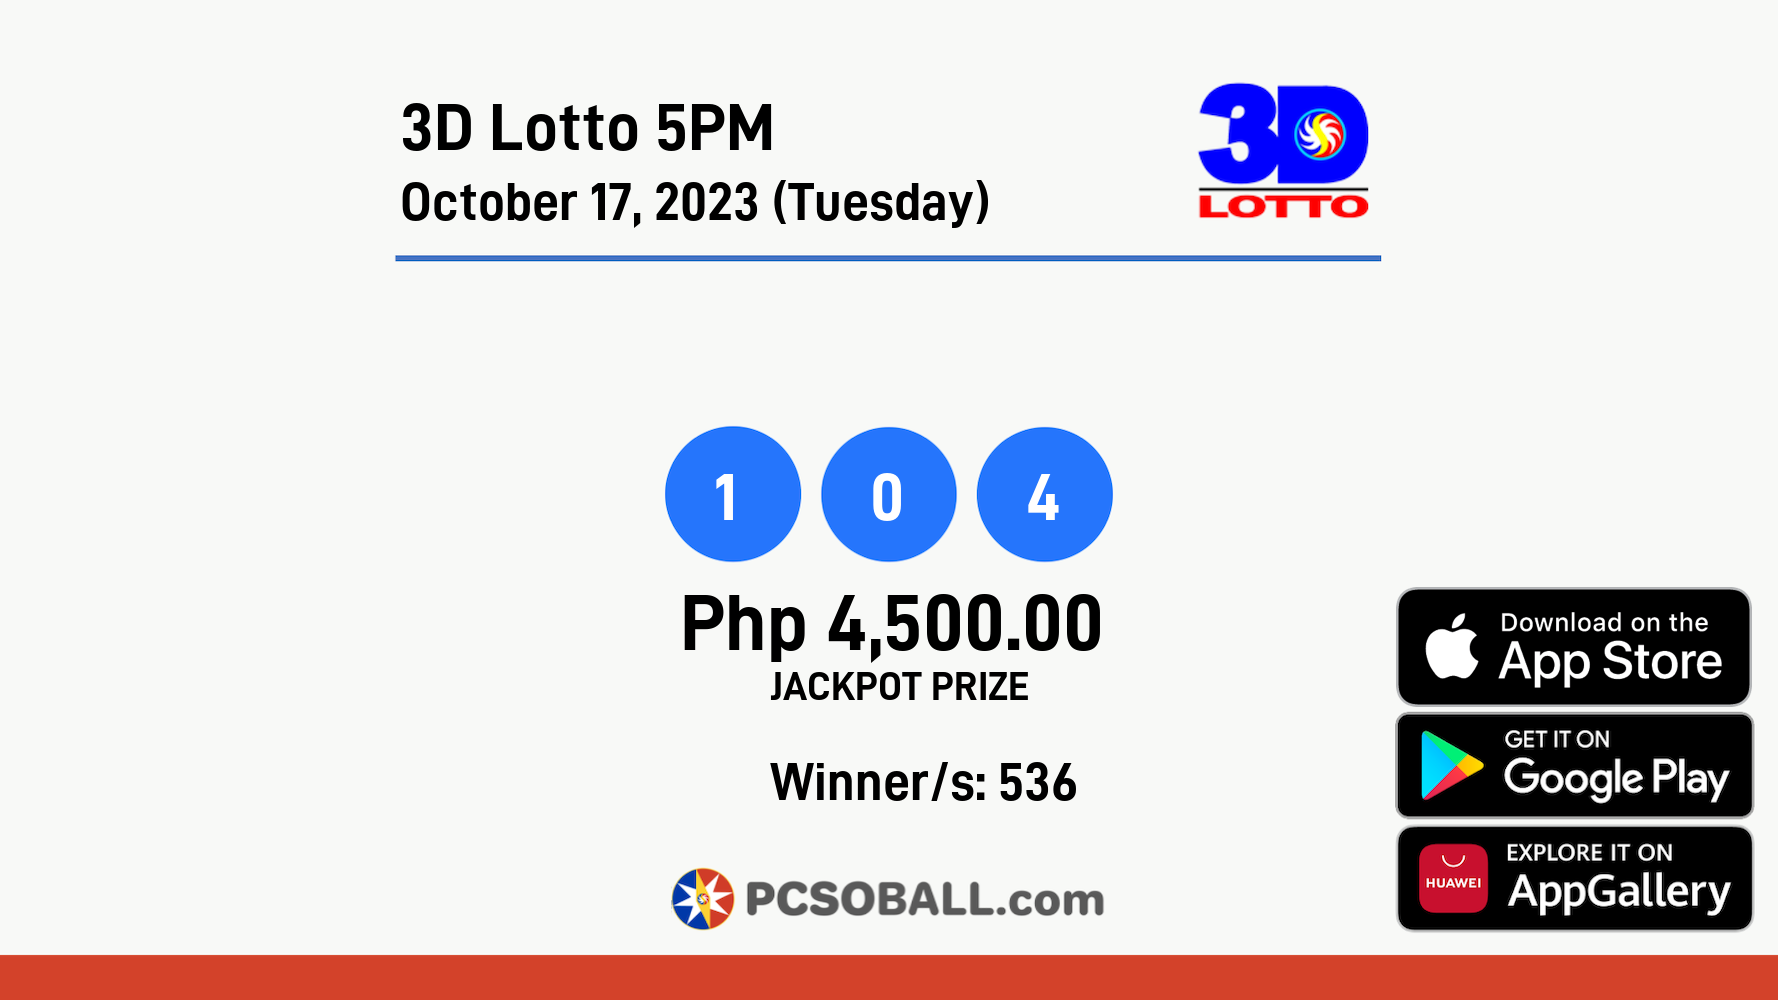 3D Lotto 5PM October 17, 2023 (Tuesday) Result